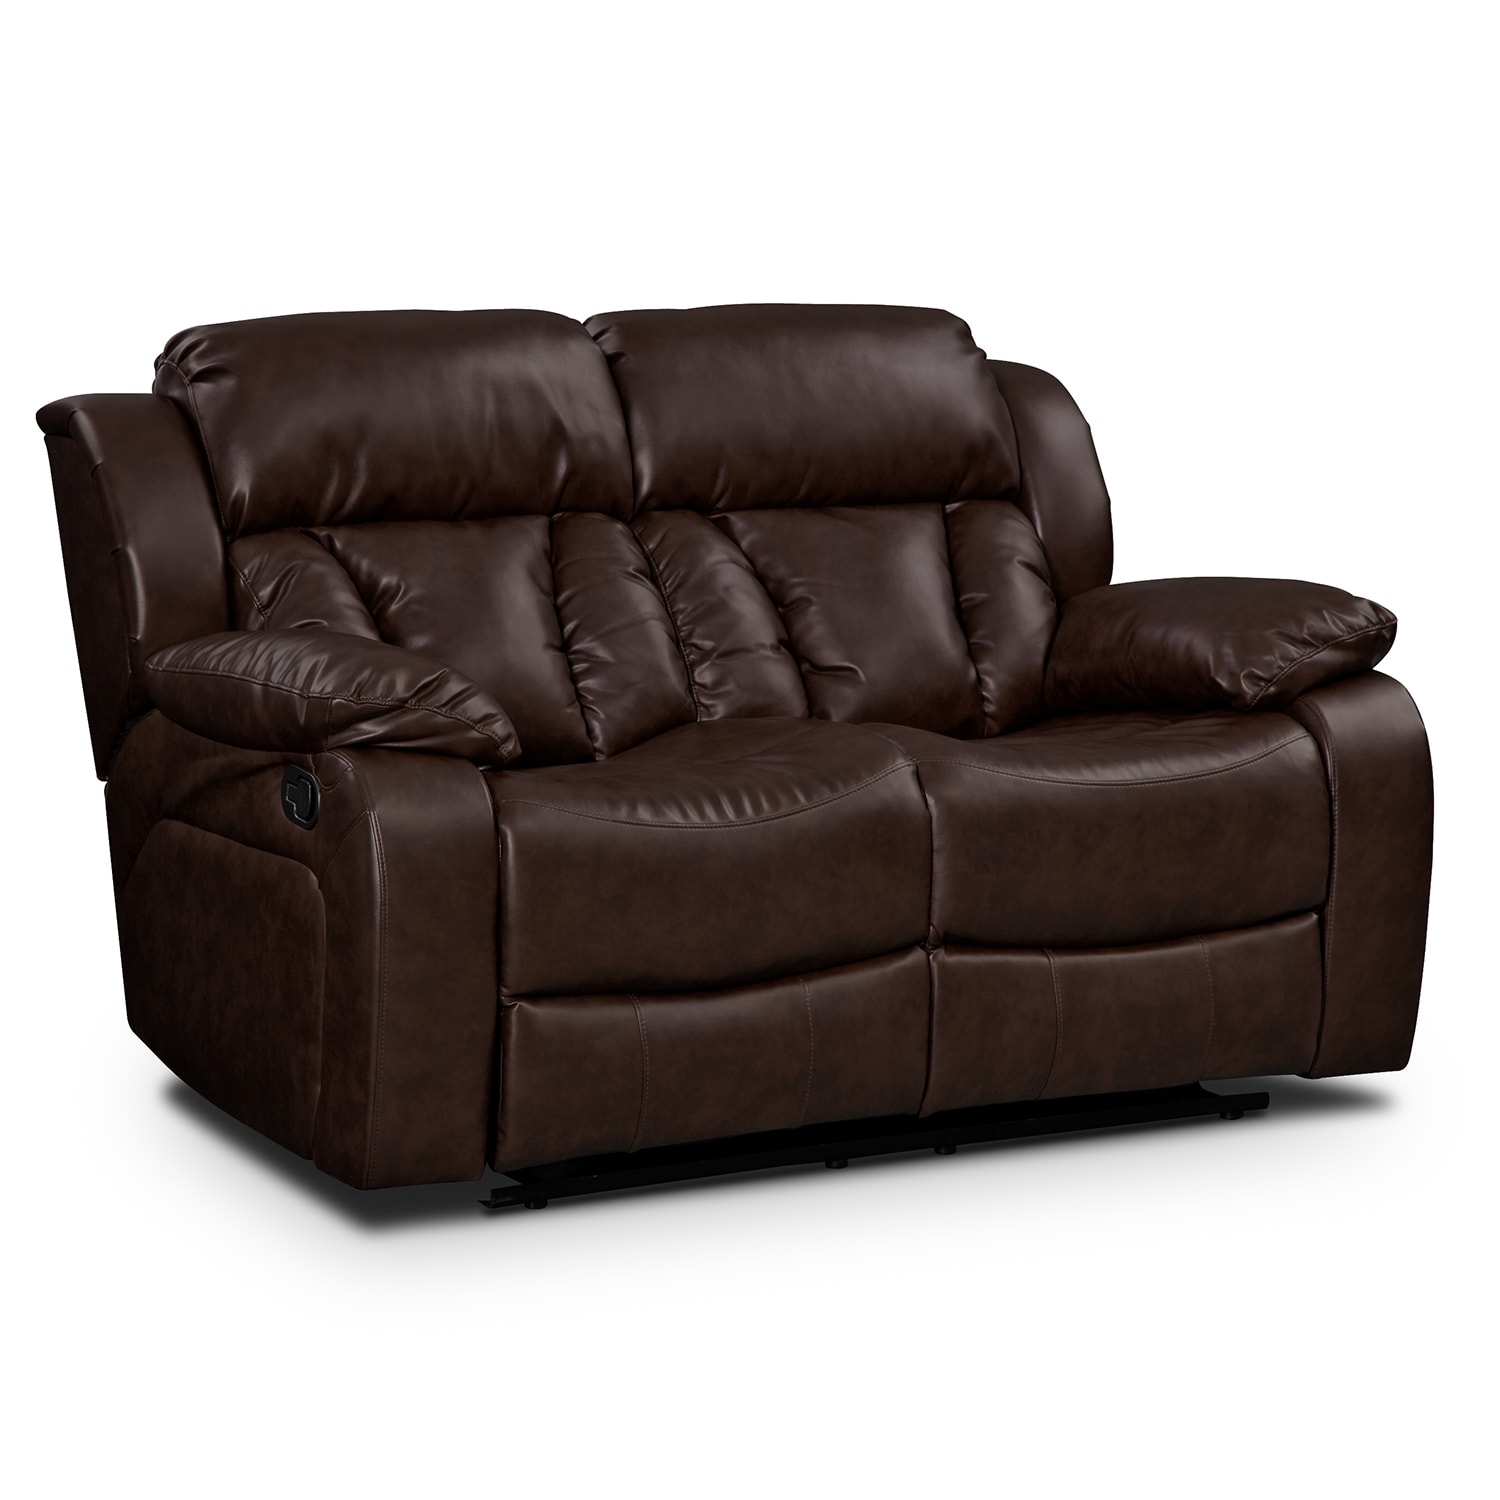 Leather Loveseat Recliners